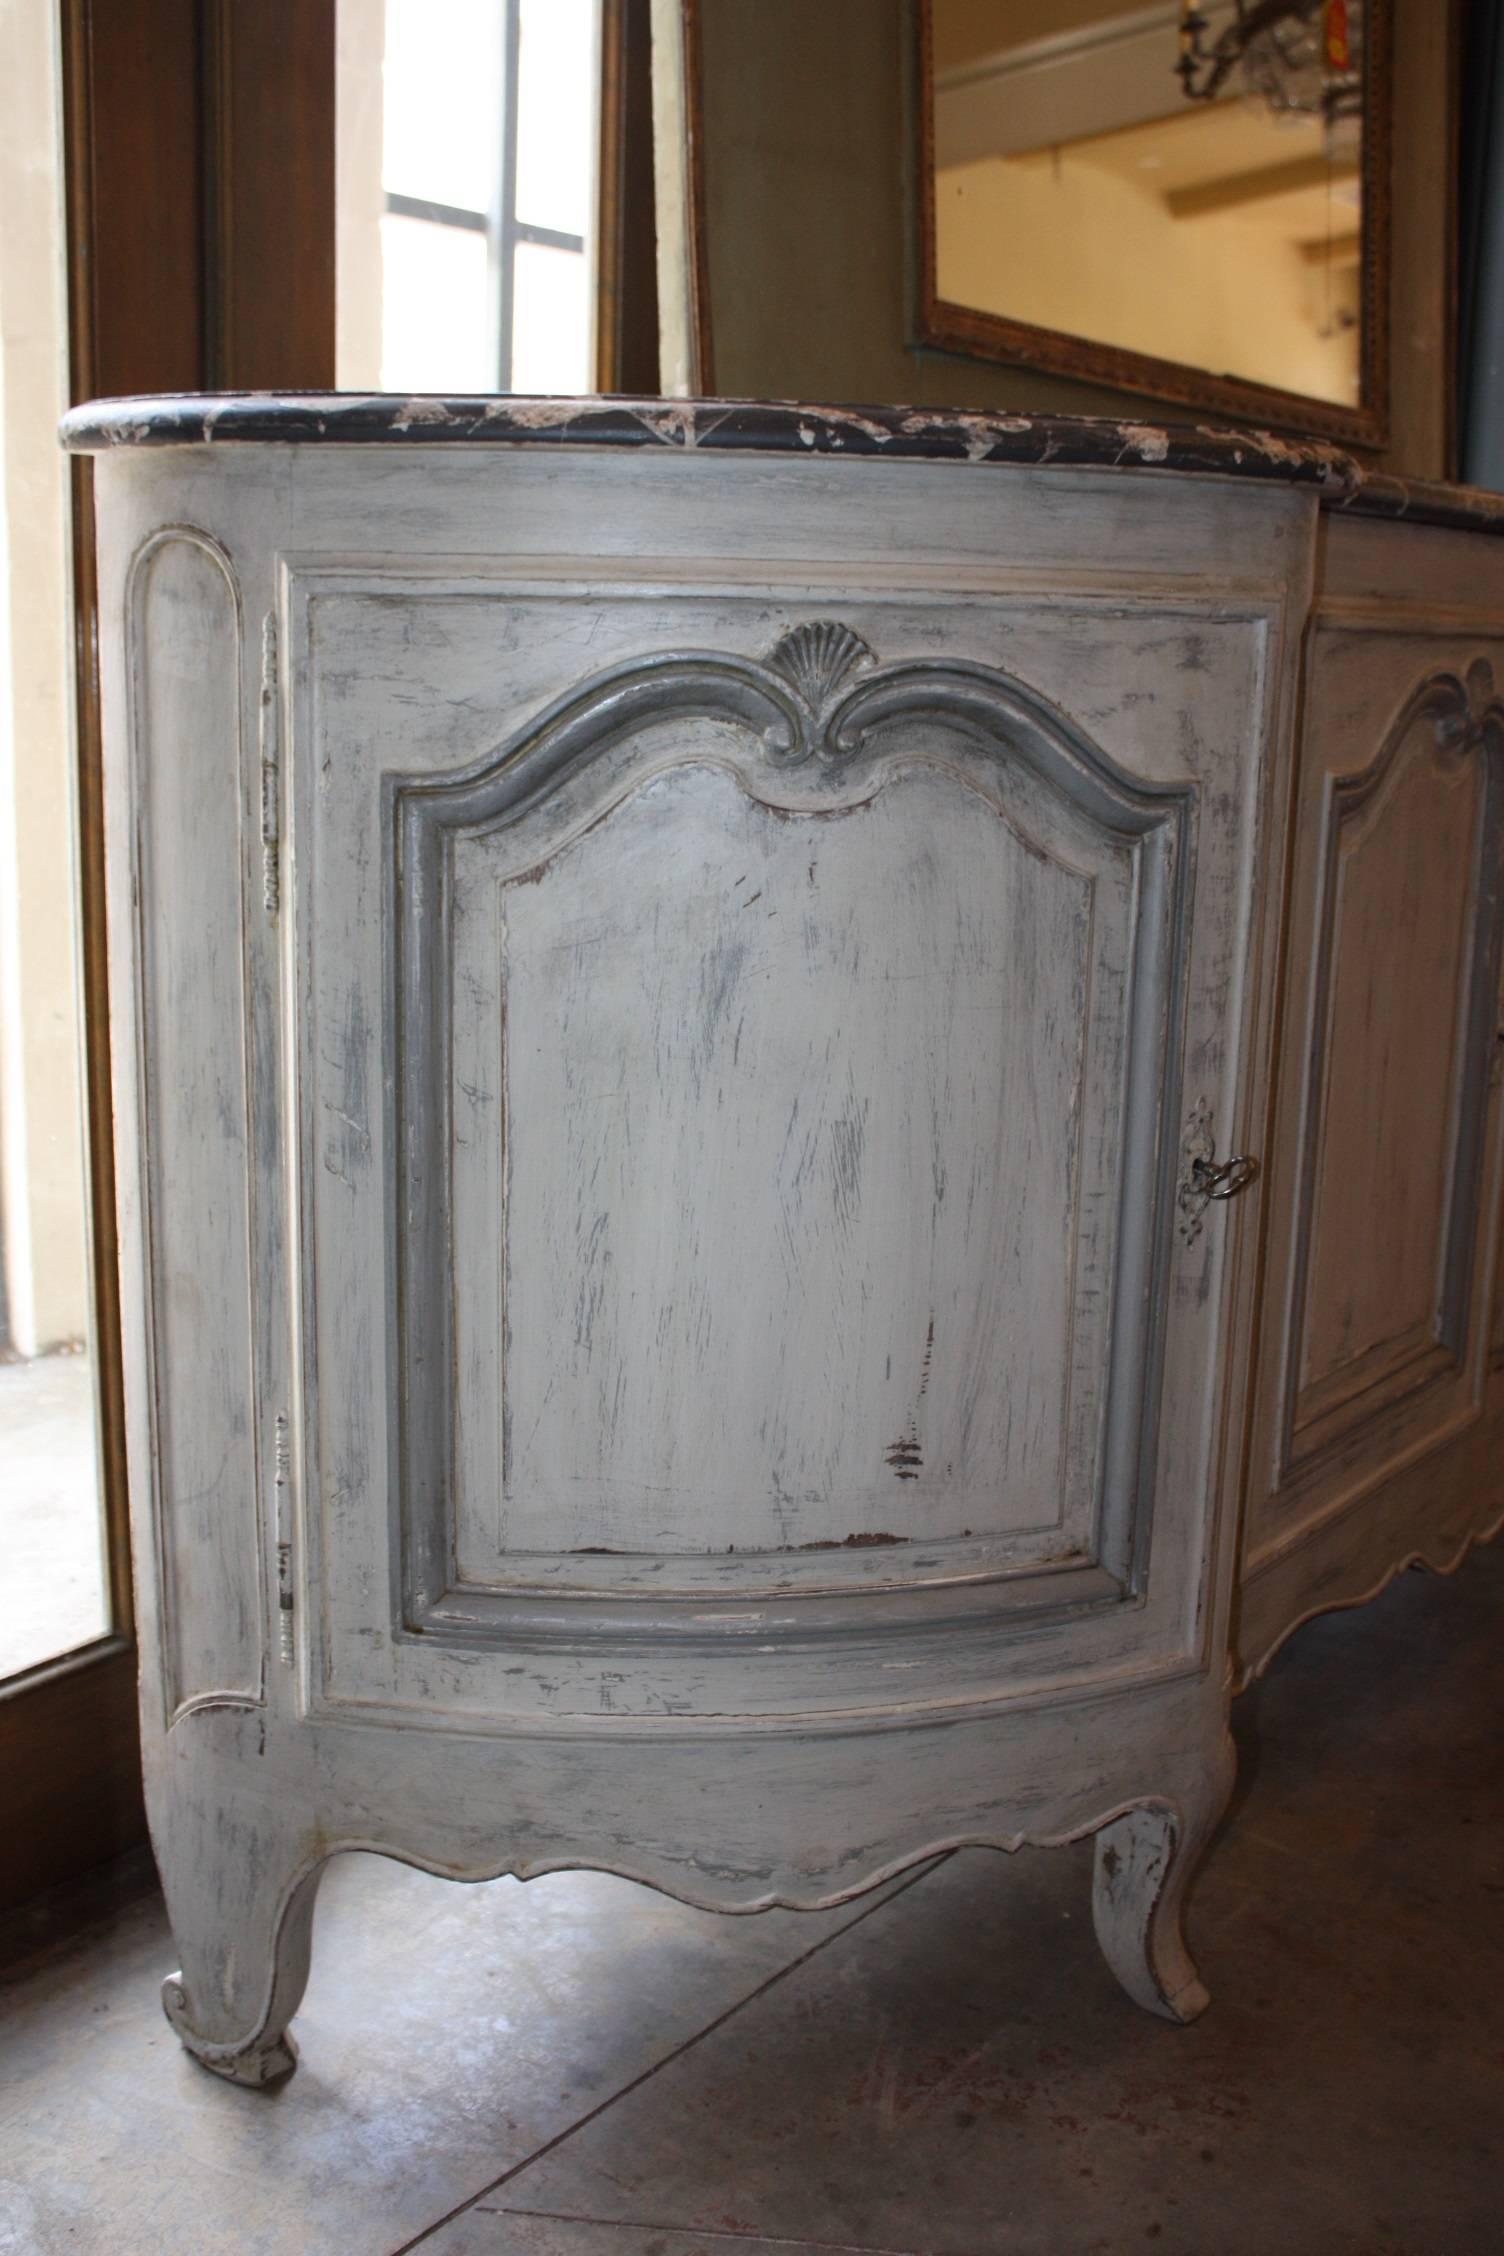 Painted French enfilade with faux marble top. Enfilade has four doors and two interior hidden drawers with original hardware. Hand carvings on the doors, drawers and on the bottom of the enfilade. It is painted a pale blue and white undertones while